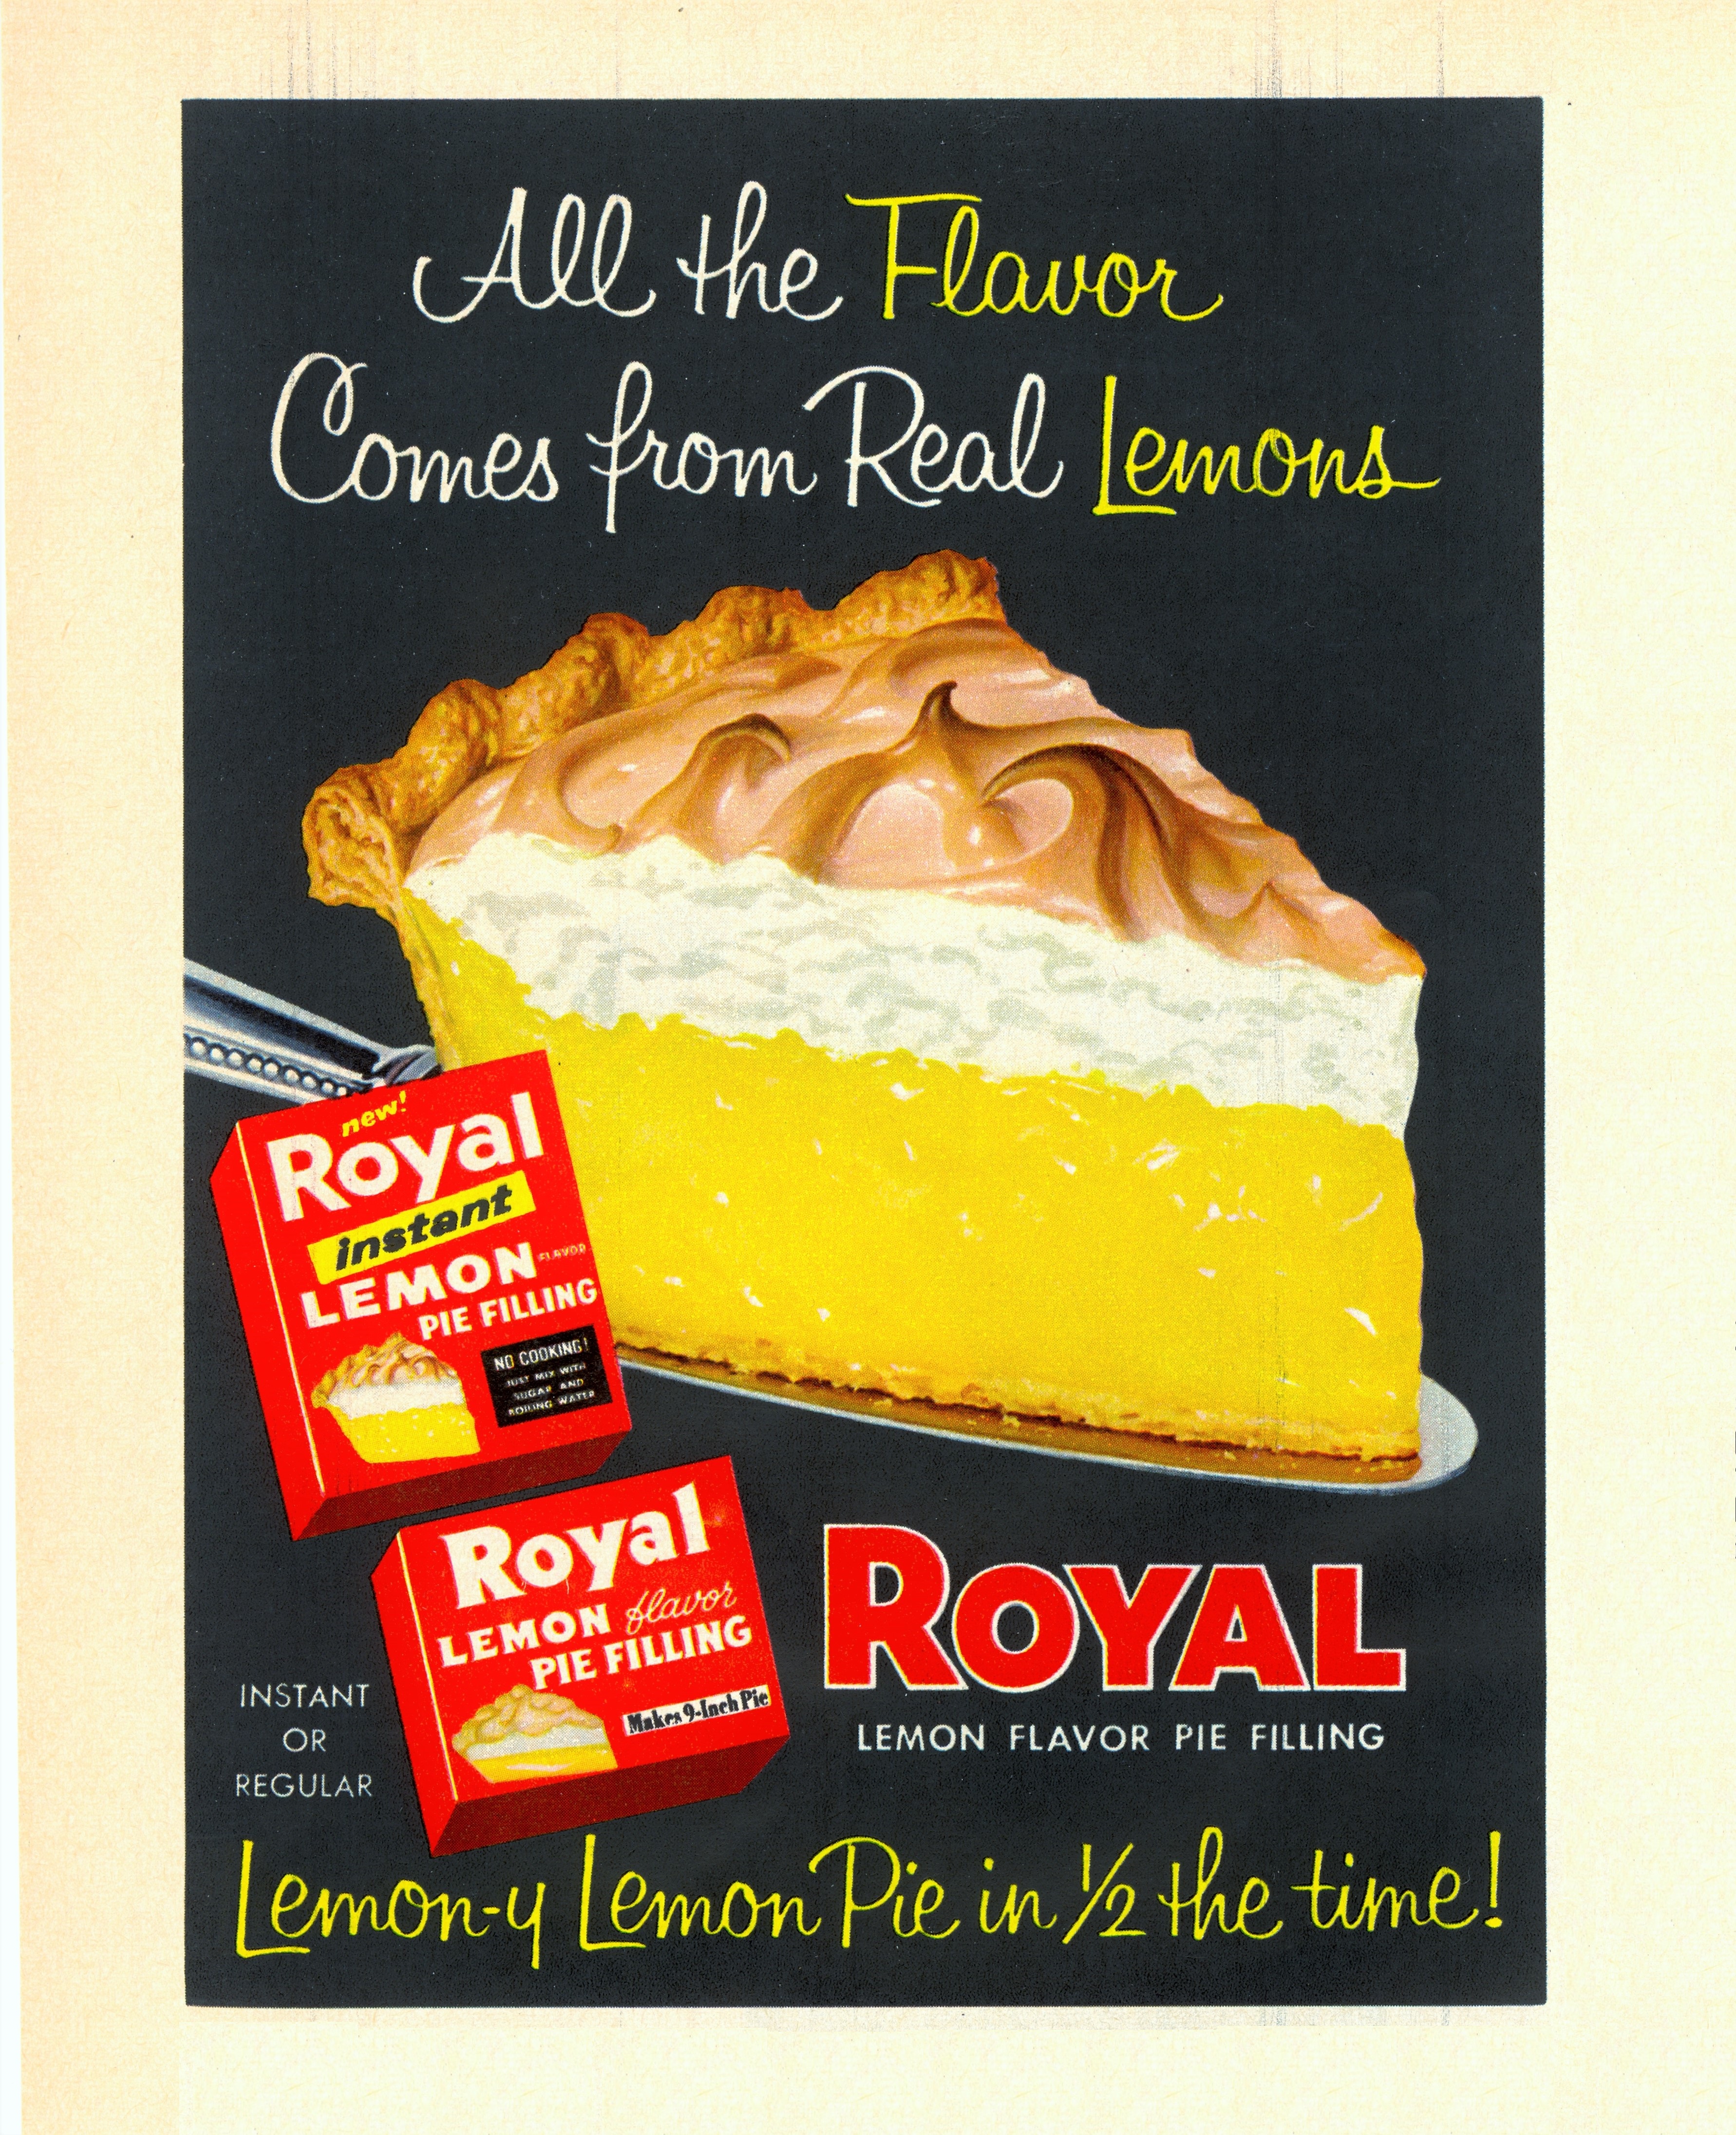 Royal Lemon Flavor Pie Filling - published in Woman's Day - October 1958